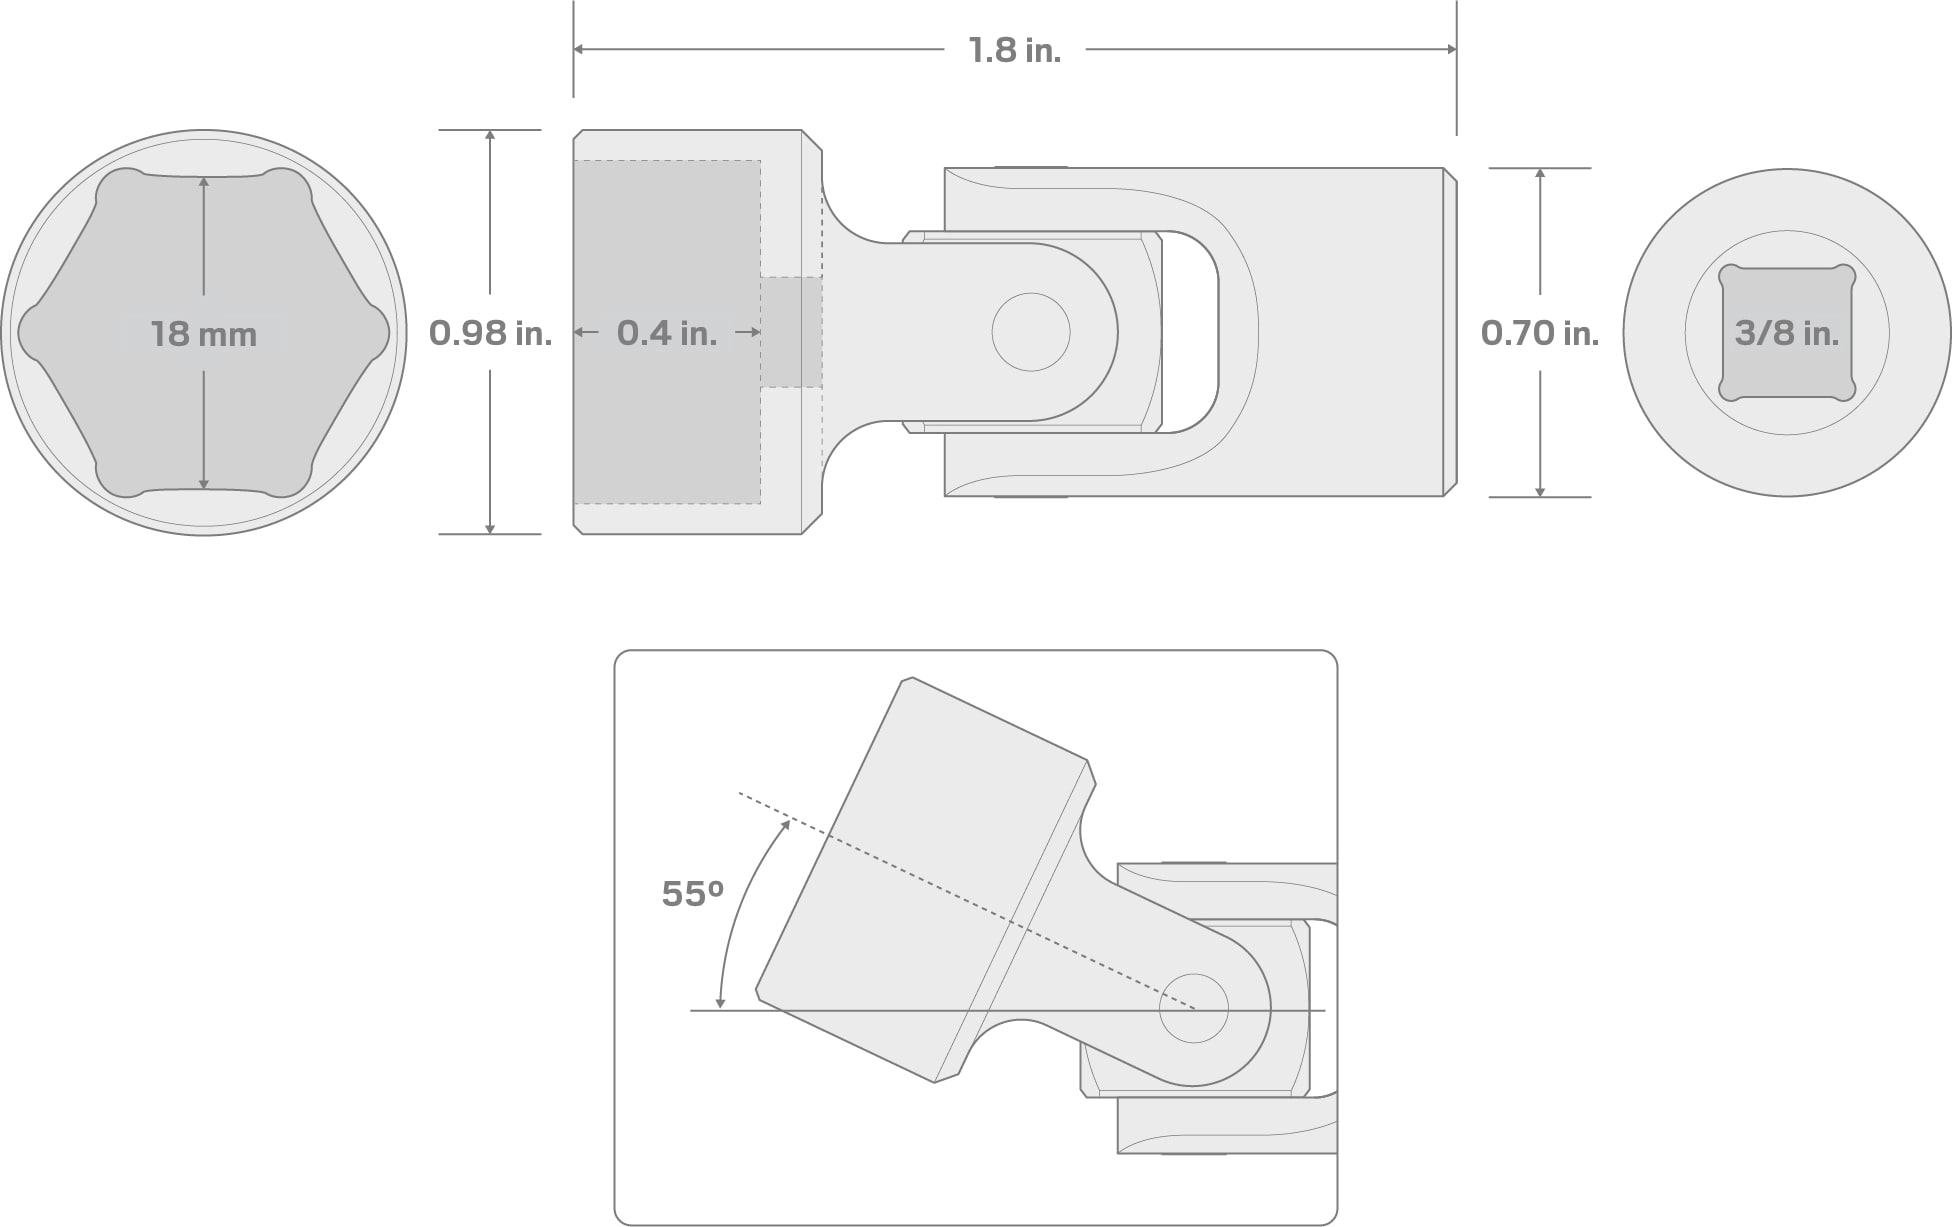 Specs for 3/8 Inch Drive x 18 mm Universal Joint Socket